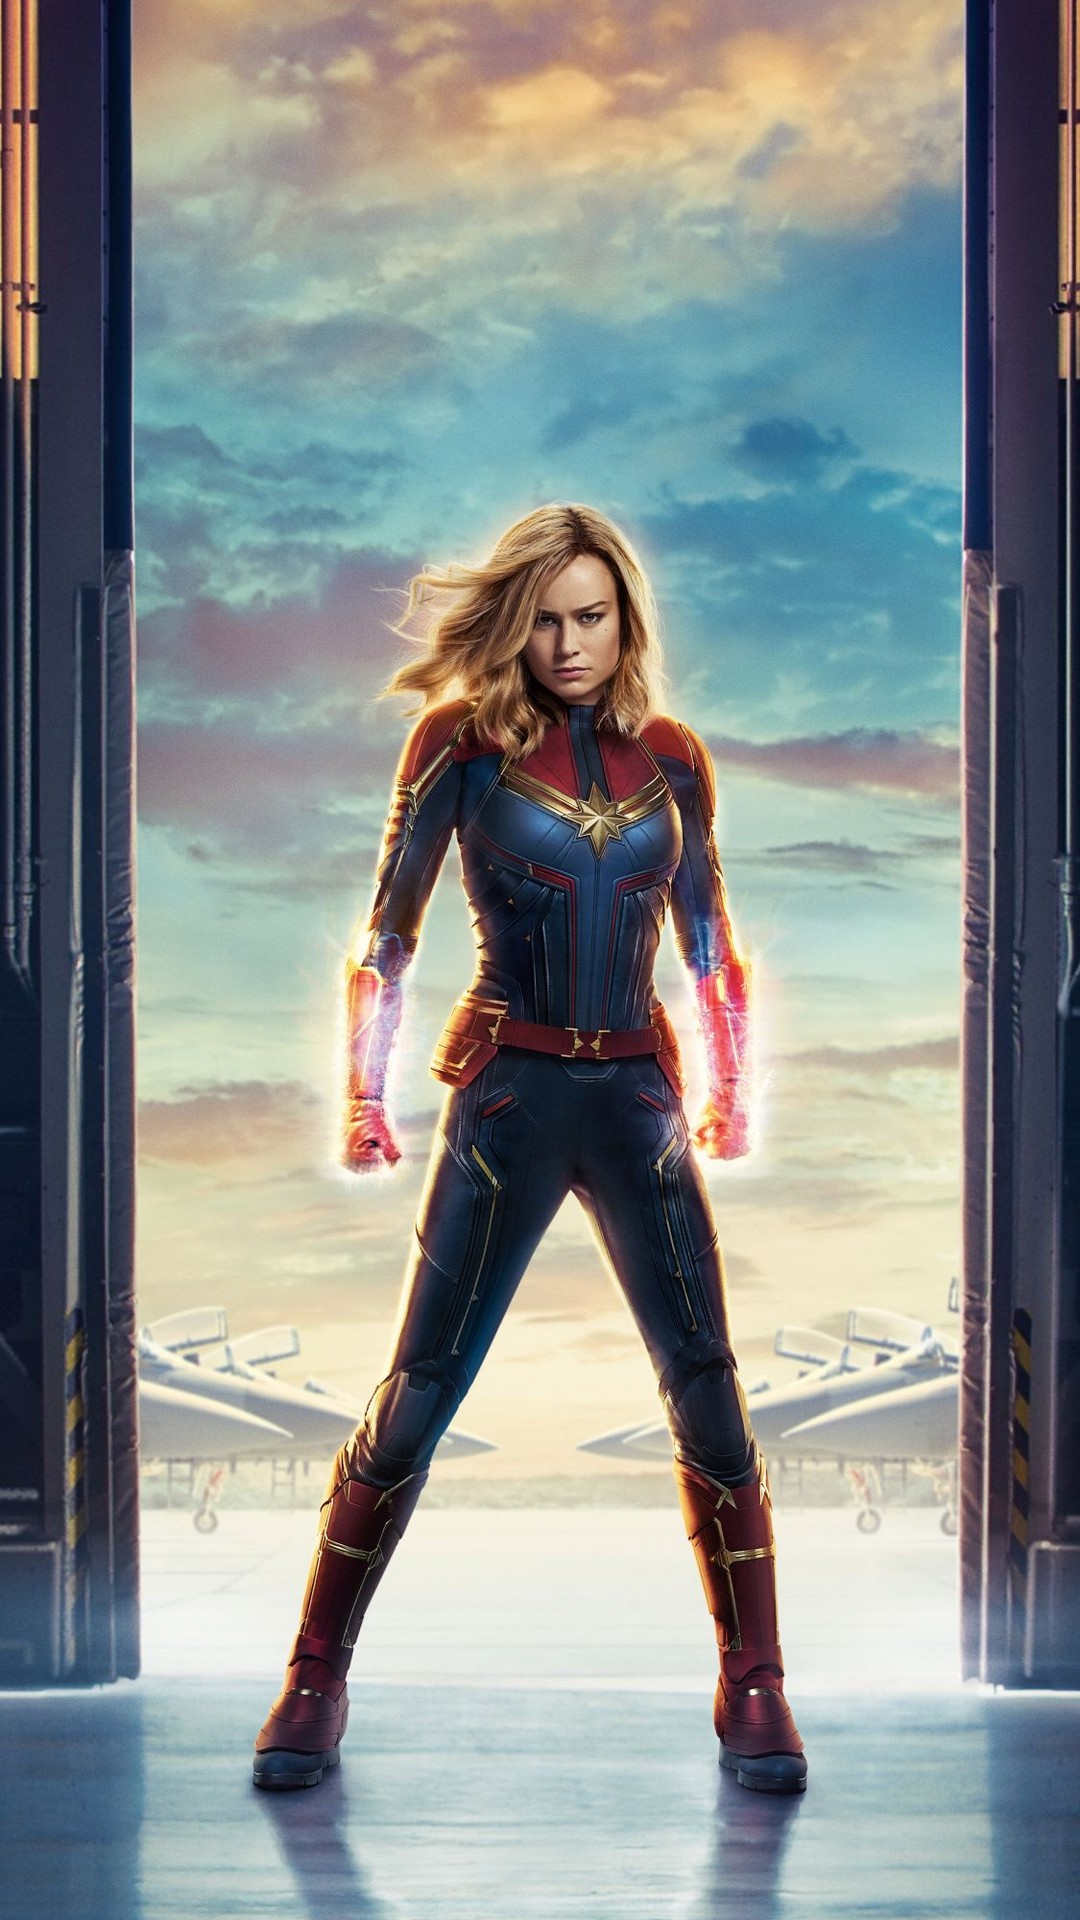 Wallpaper Captain Marvel iPhone with high-resolution 1080x1920 pixel. You can use this wallpaper for your iPhone 5, 6, 7, 8, X backgrounds, Mobile Screensaver, or iPad Lock Screen